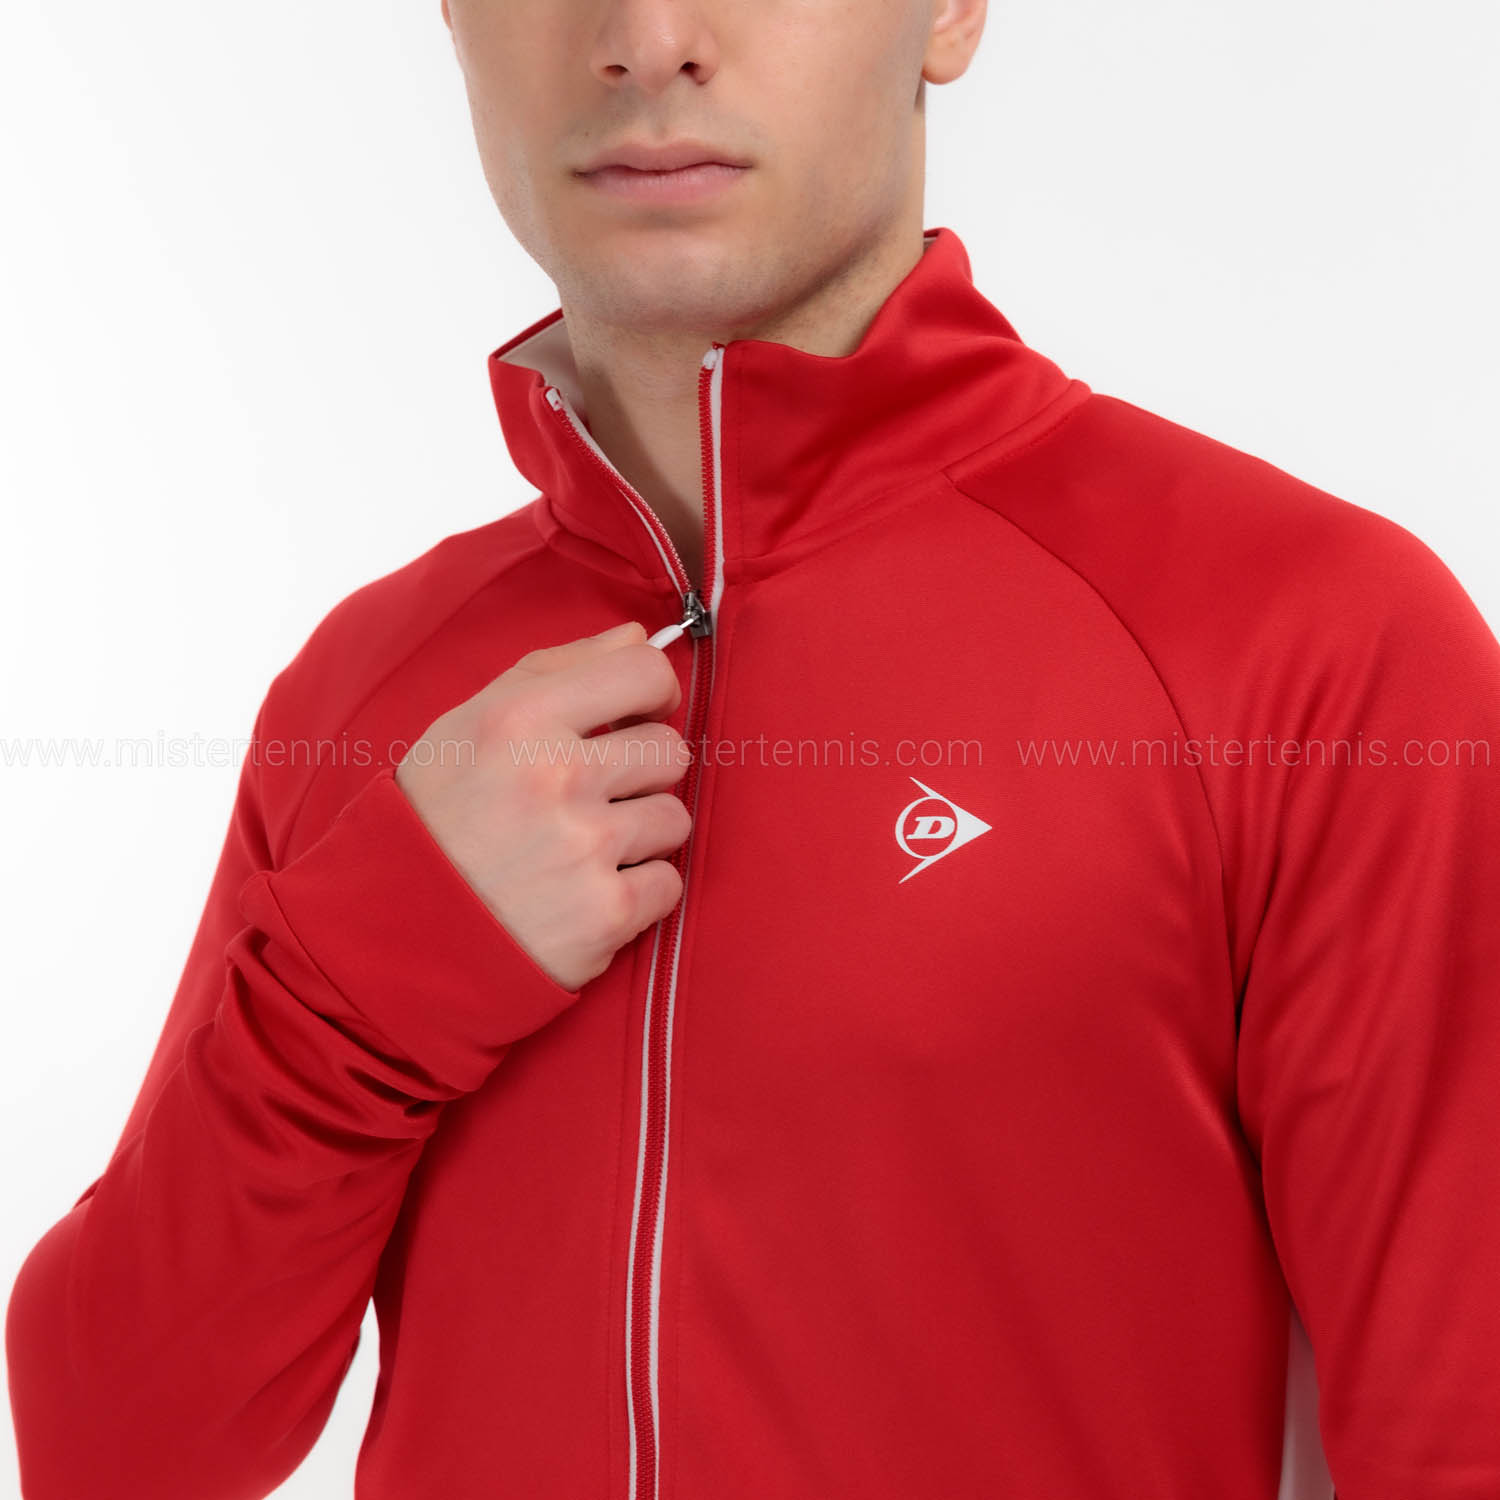 Dunlop Club Knitted Chaqueta - Red/White